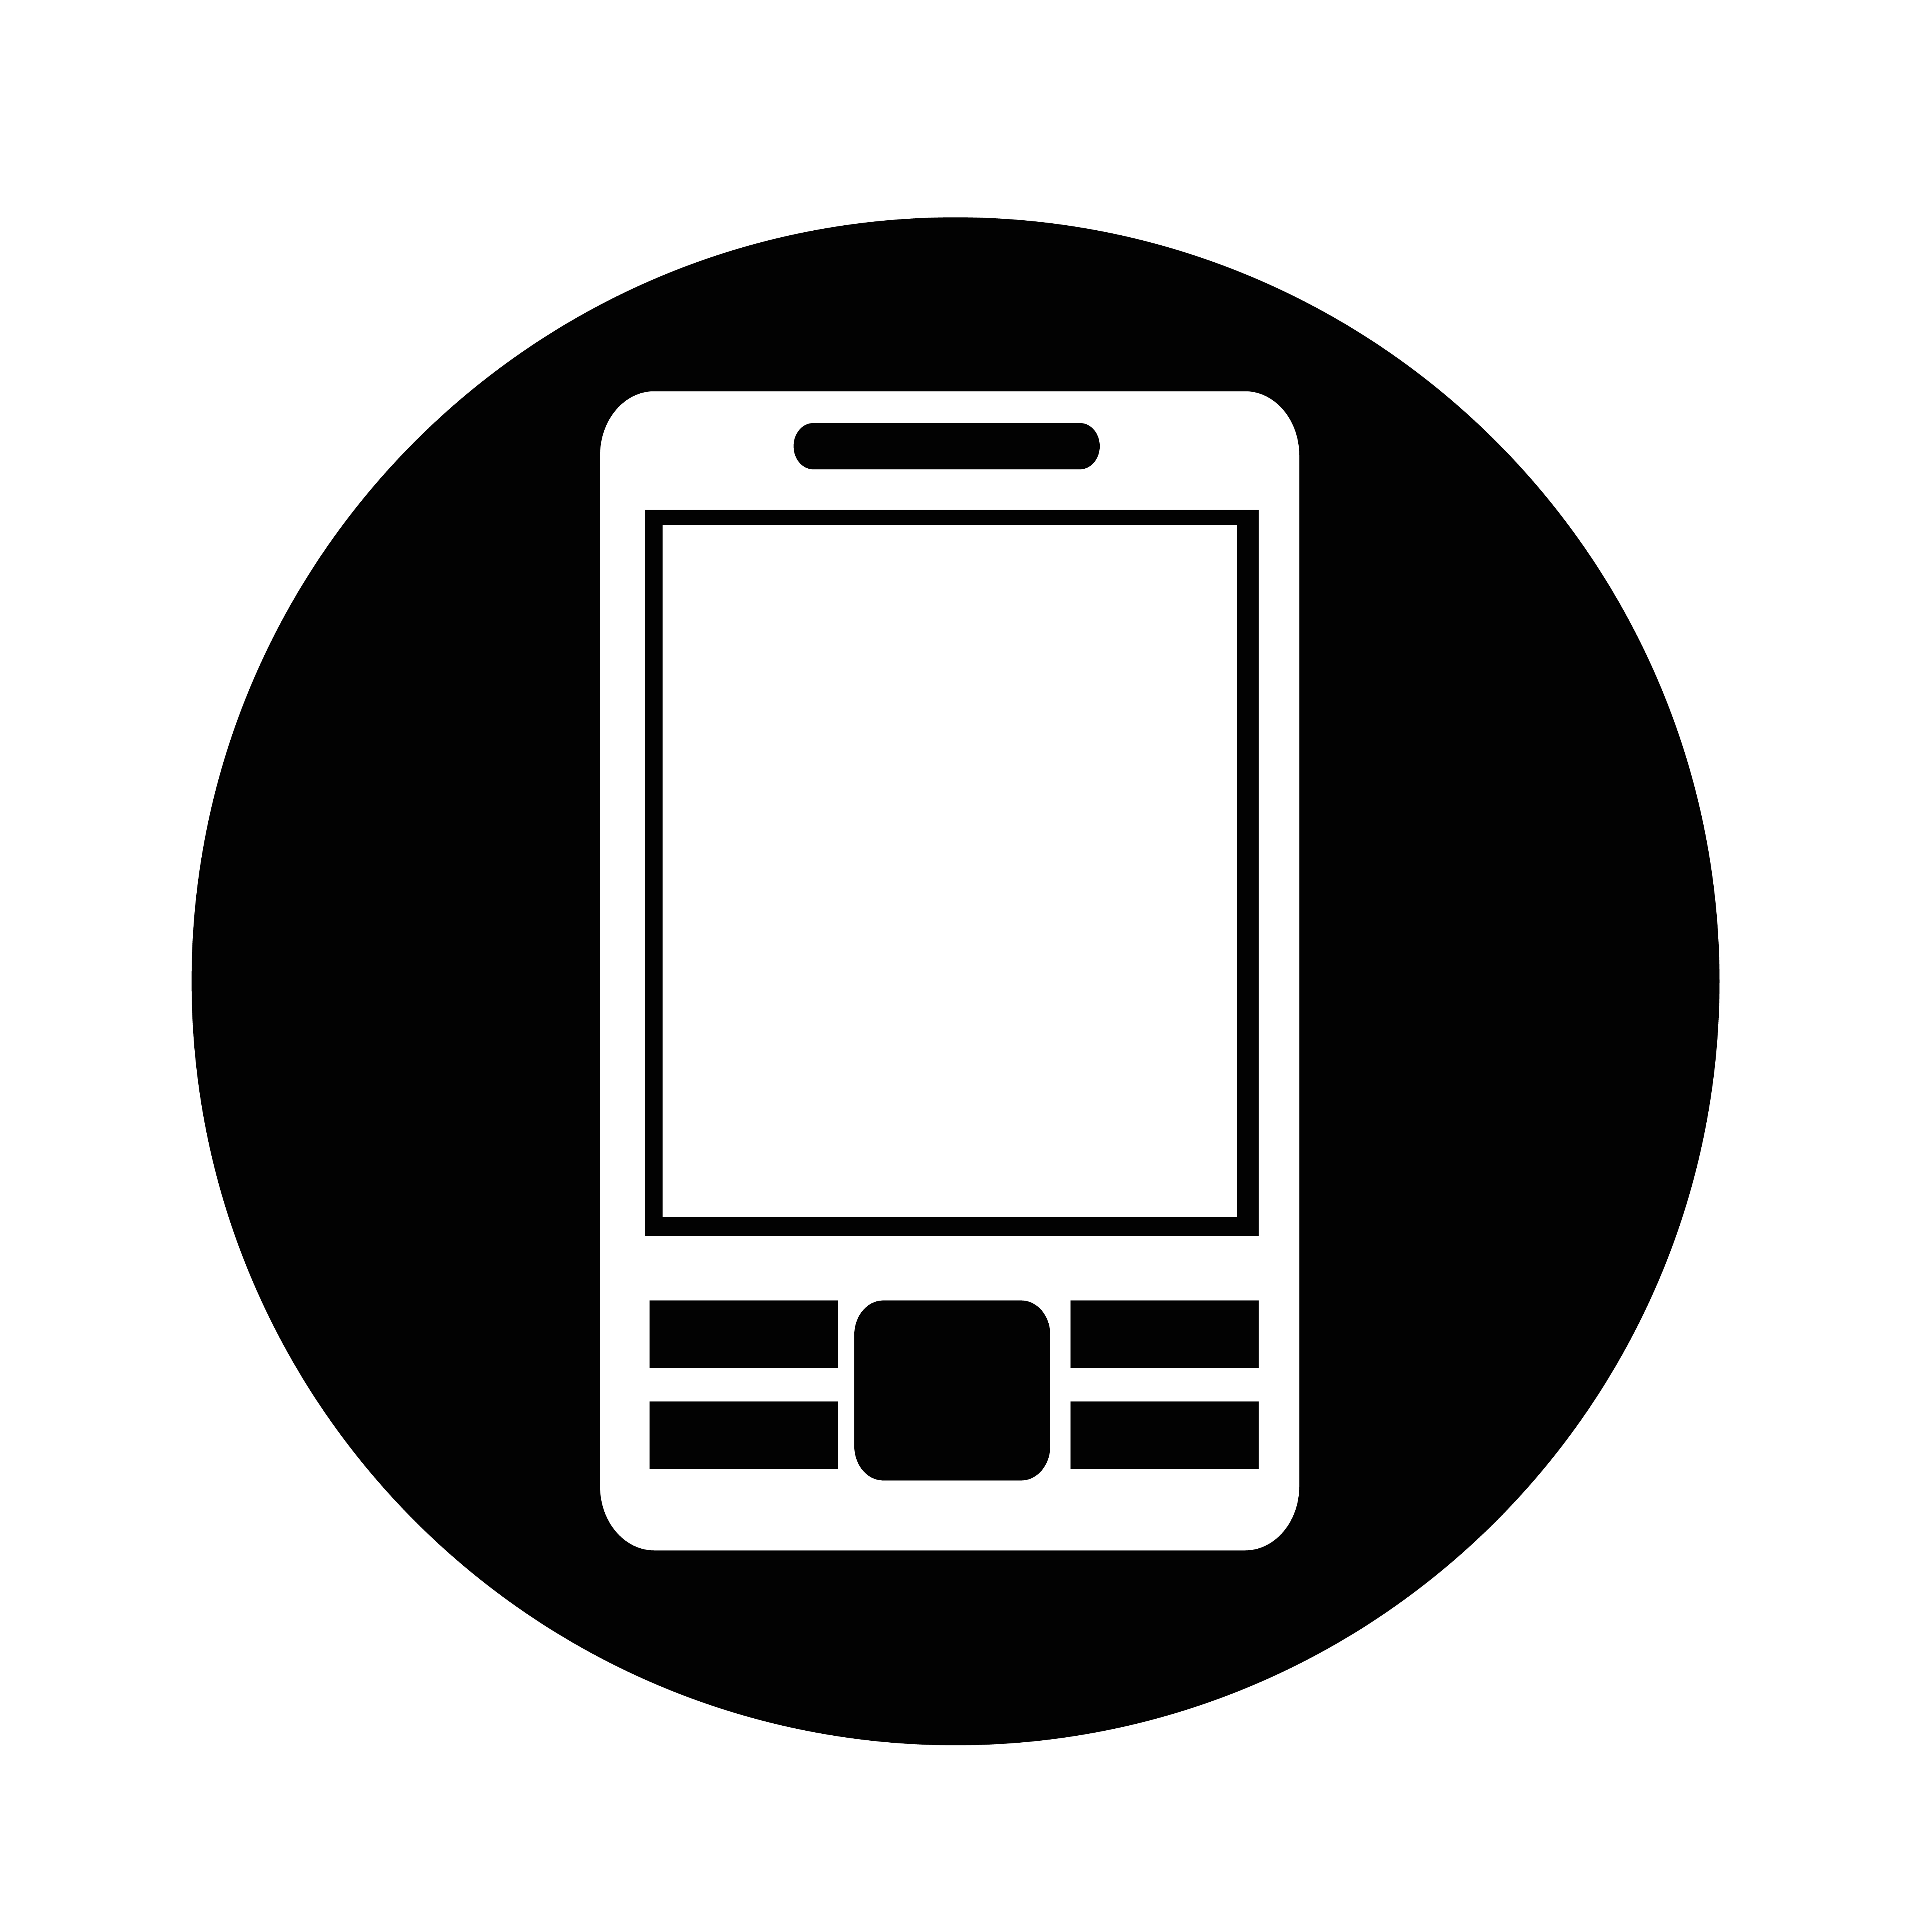 Mobile Phone Icon 564522 Download Free Vectors Clipart Graphics